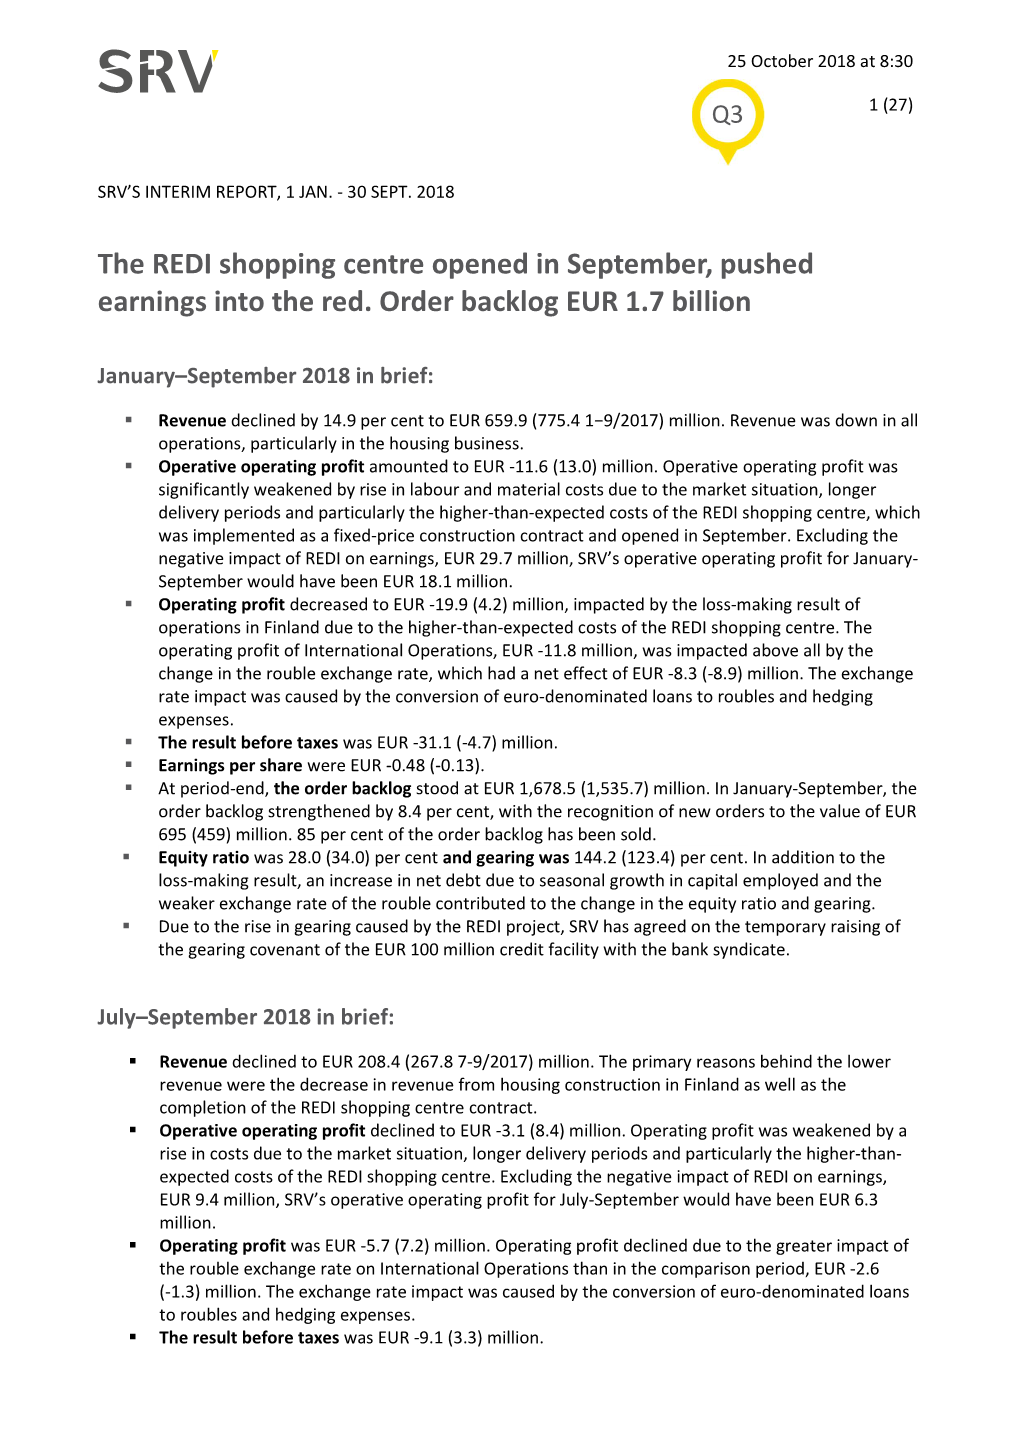 The REDI Shopping Centre Opened in September, Pushed Earnings Into the Red